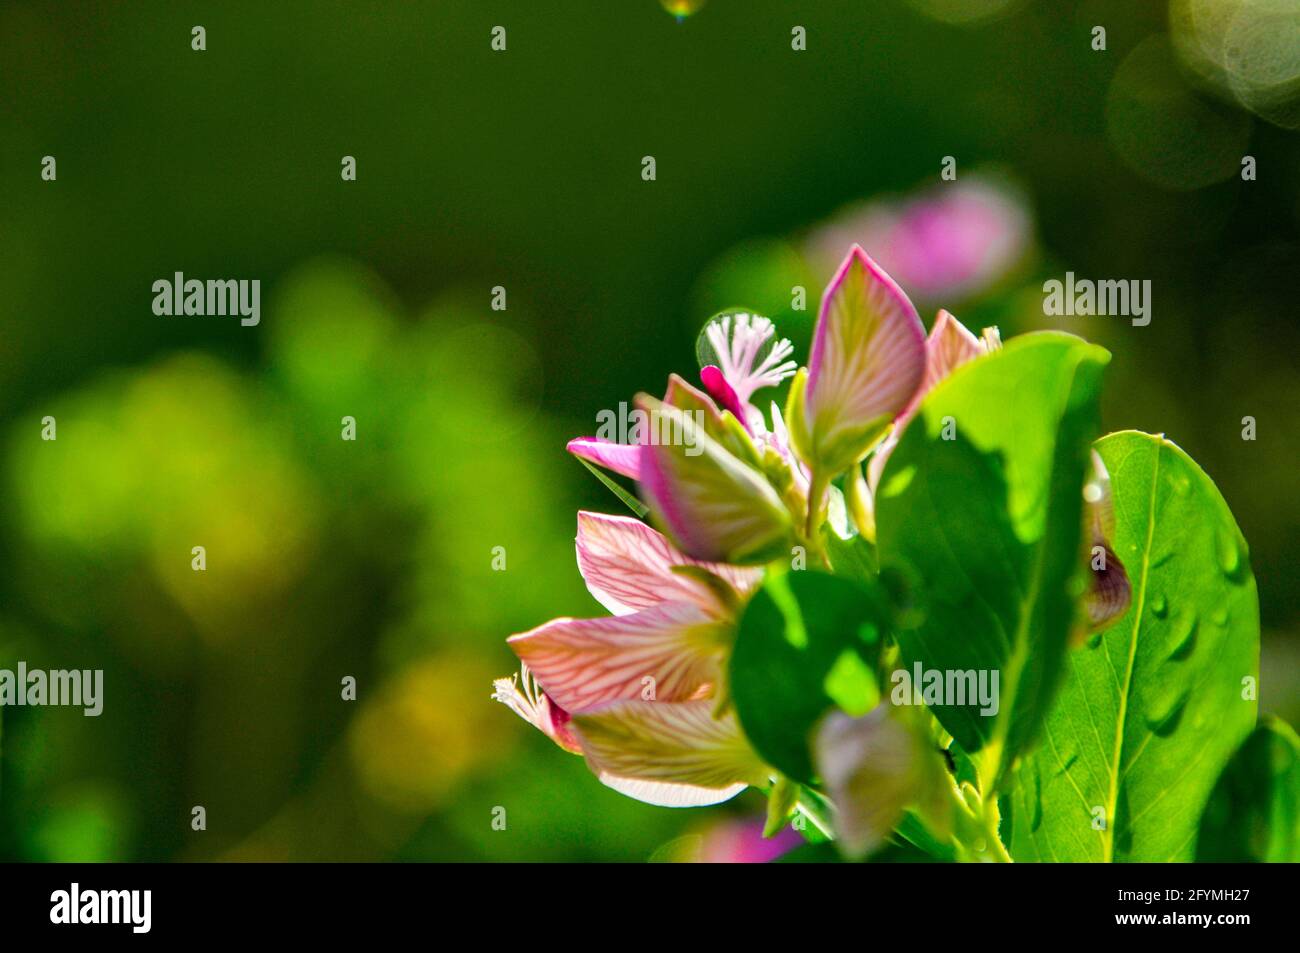 Closeup of blooming polygala myrtifolia in a garden under the sunlight with a blurry background Stock Photo